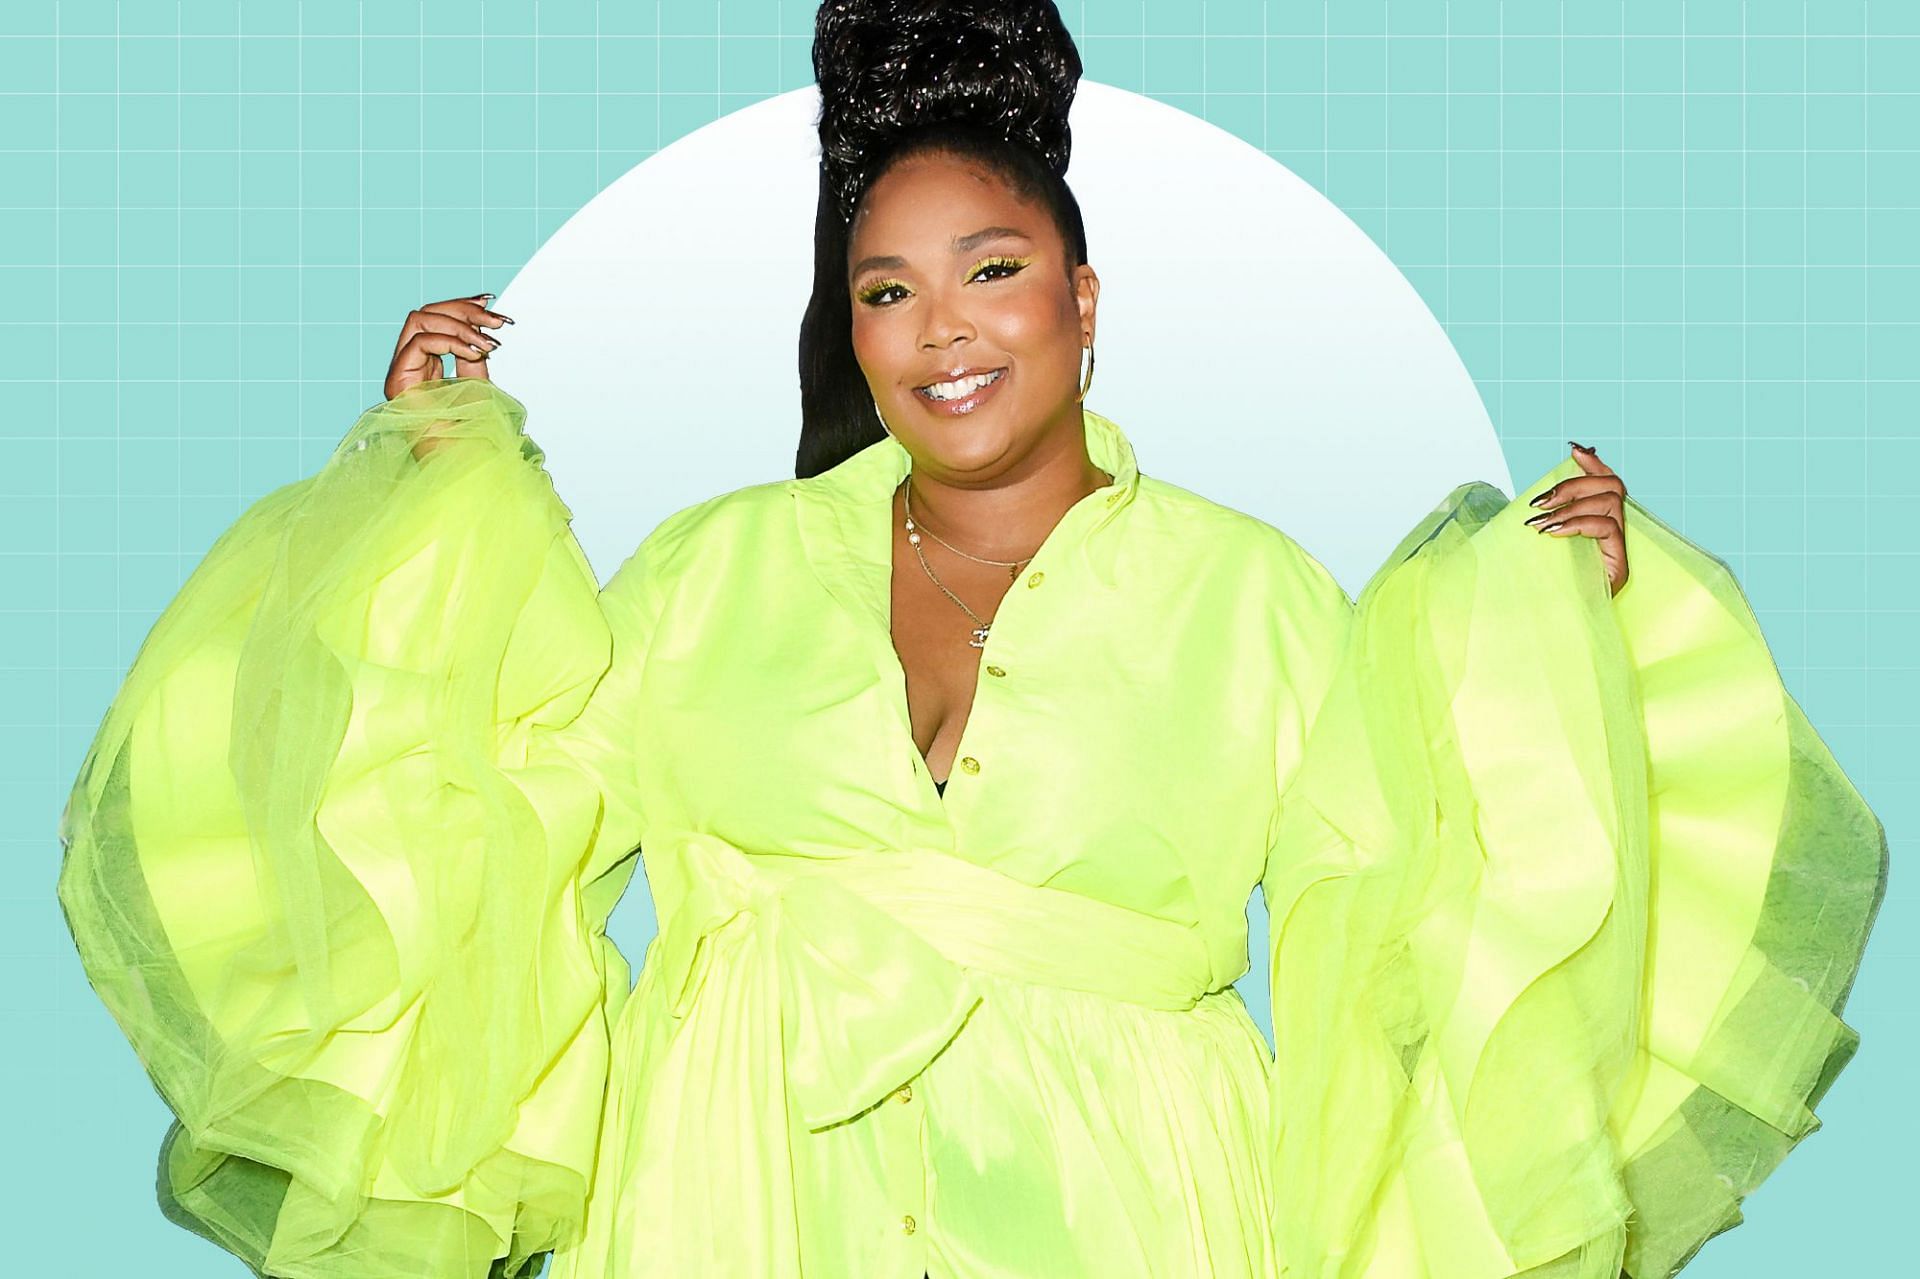 Lizzo claims that she creates music from her own Black experience (image via Getty Images)